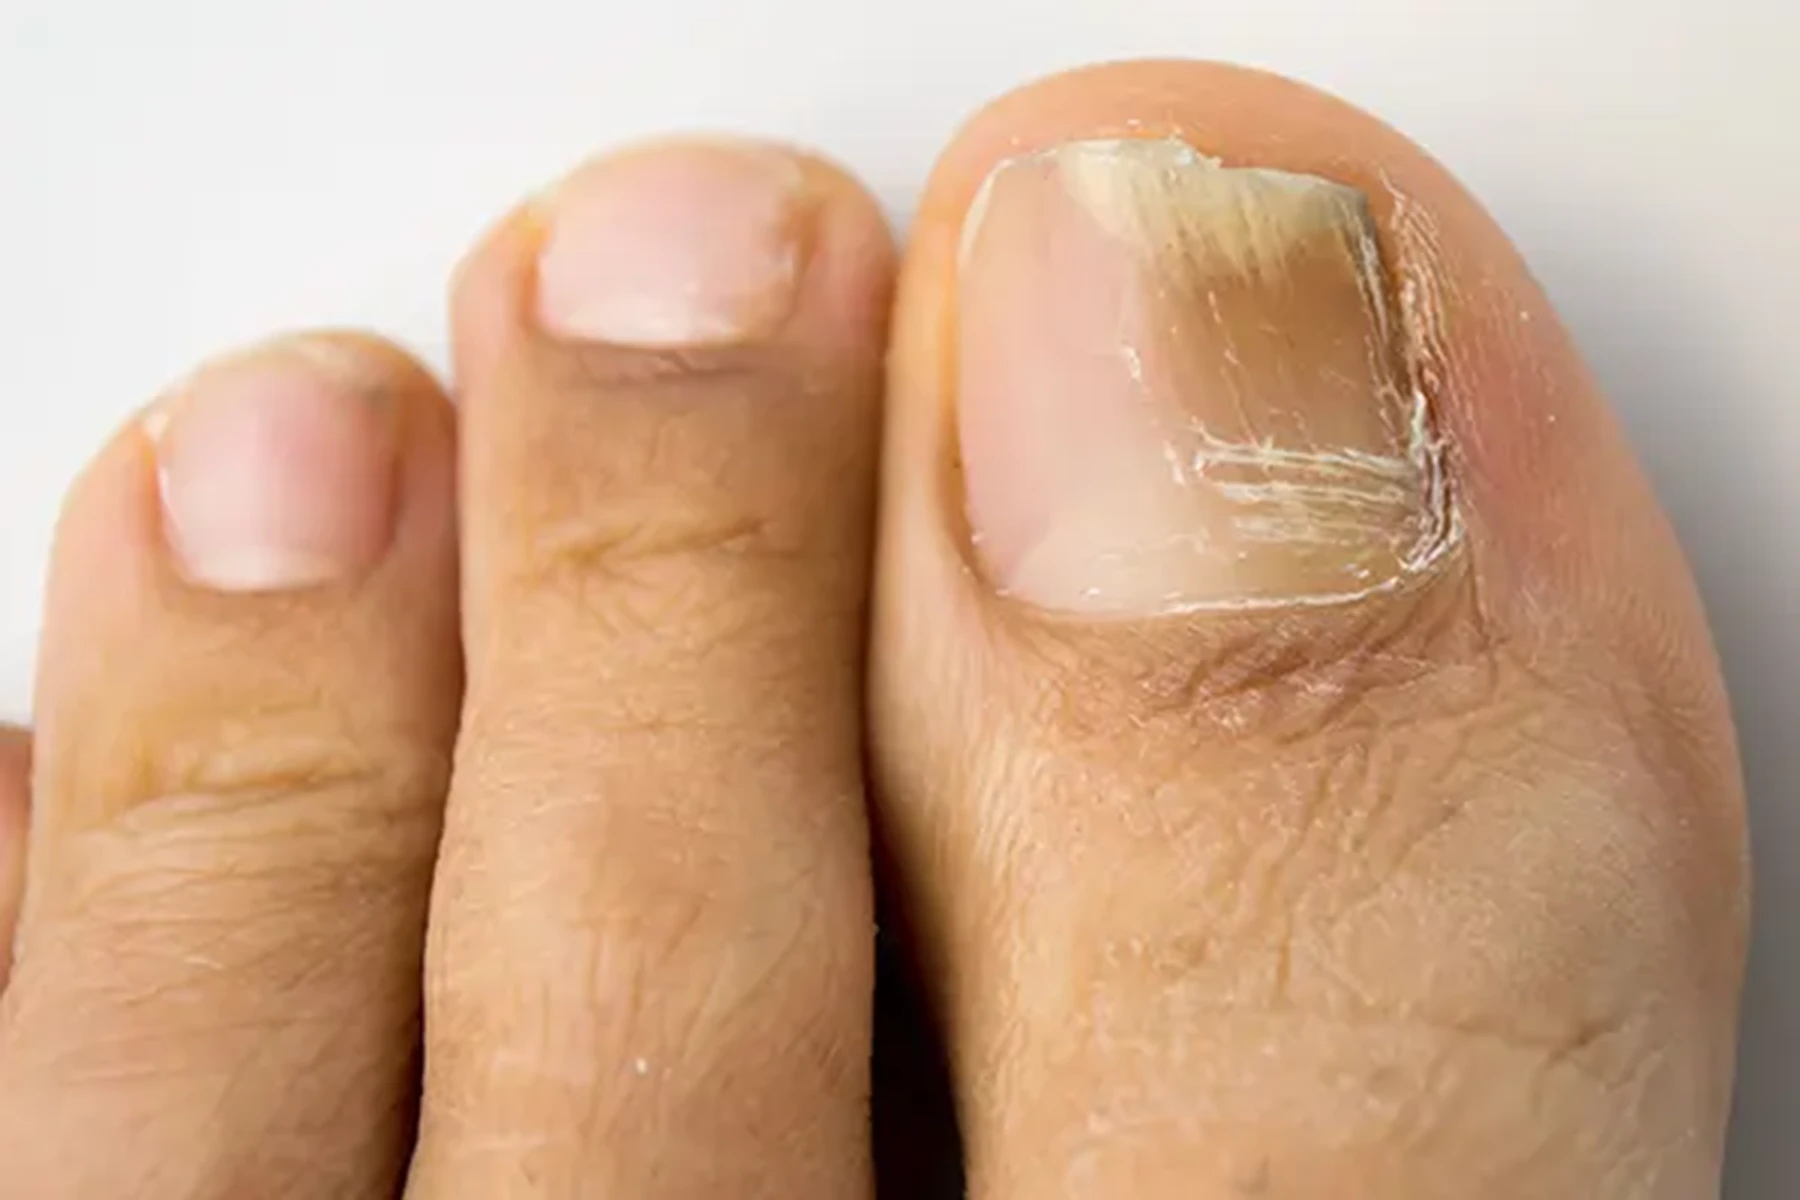 What causes white spots on nails and how to manage them? - Dr. Amee Daxini  - YouTube